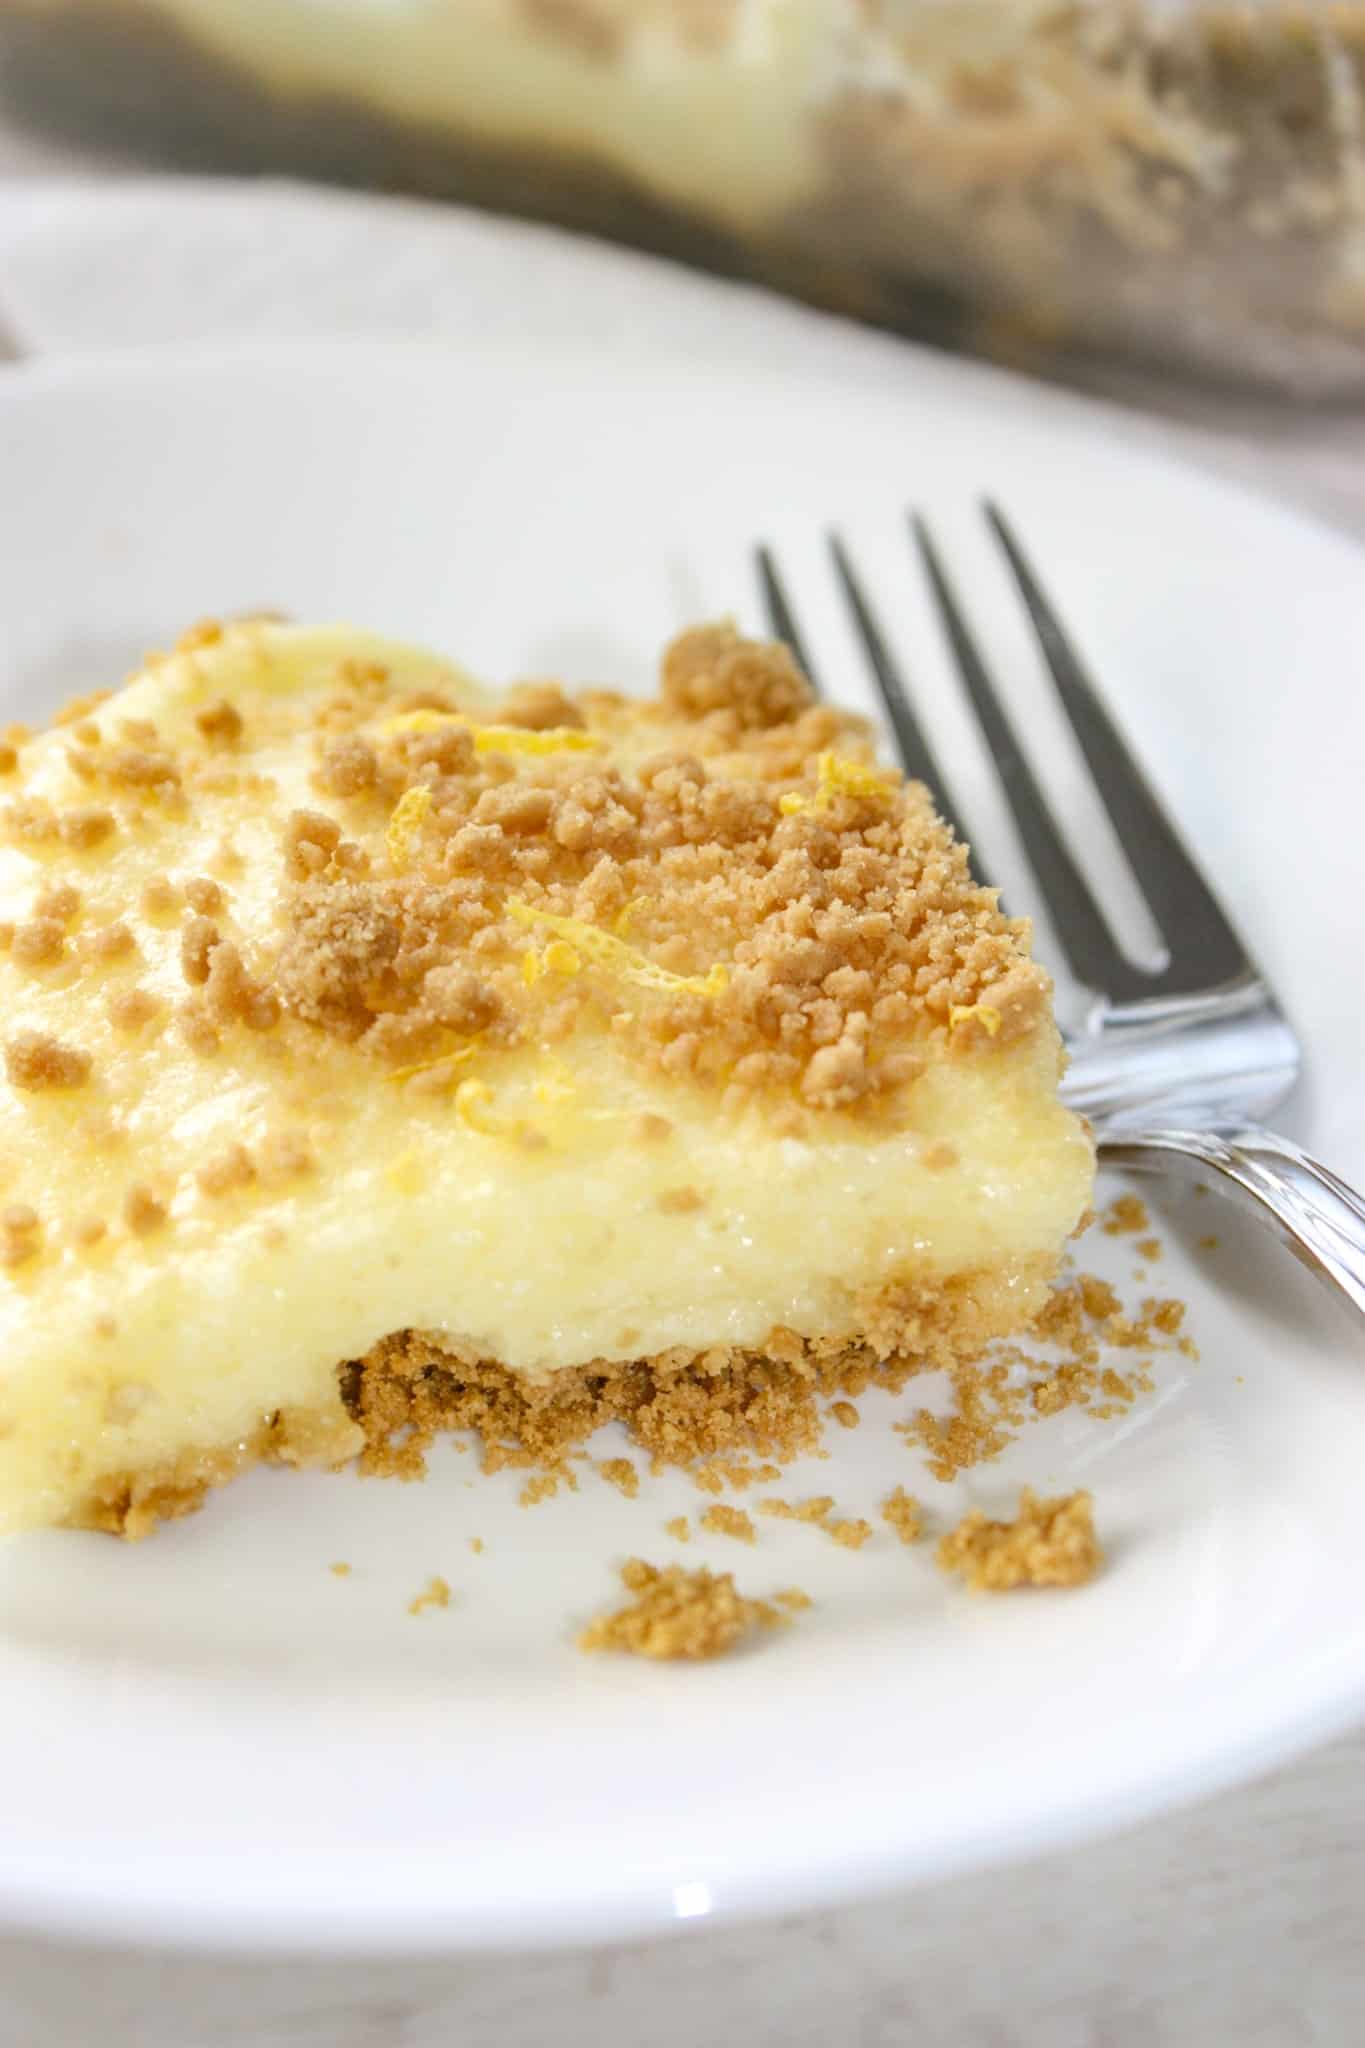 Lemon Fluff Square is a very light and refreshing citrus dessert that is a tasty way to complete your meal.  This gluten free summer dessert loaded with citrus flavour will quickly become a staple in your home!